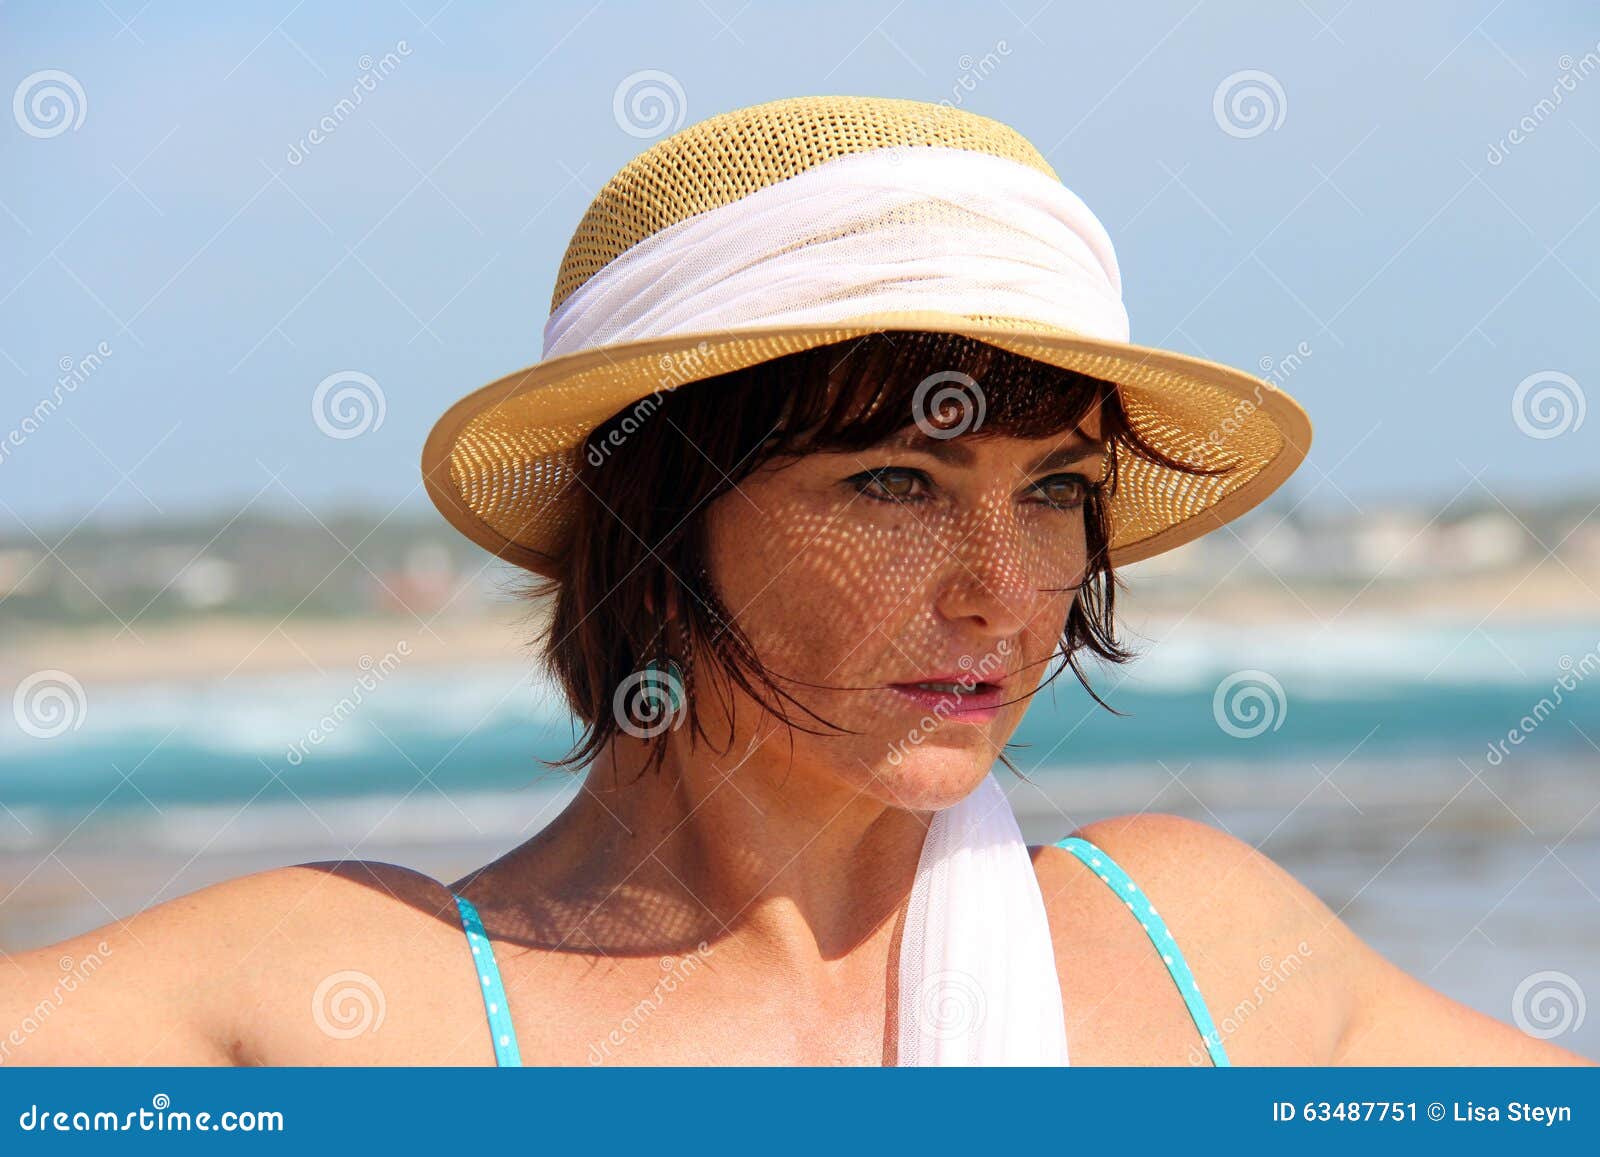 Woman Wearing A Summer Hat Stock Image Image Of Short 63487751